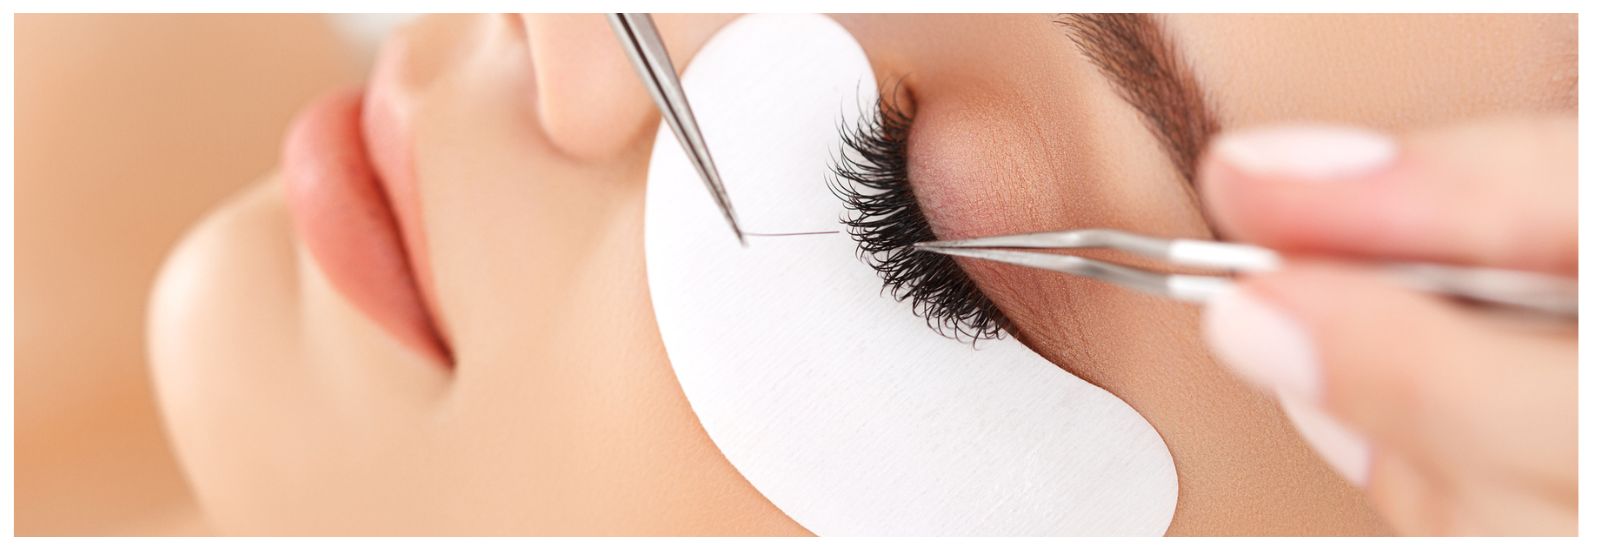 A person is holding some scissors and putting on their lashes.